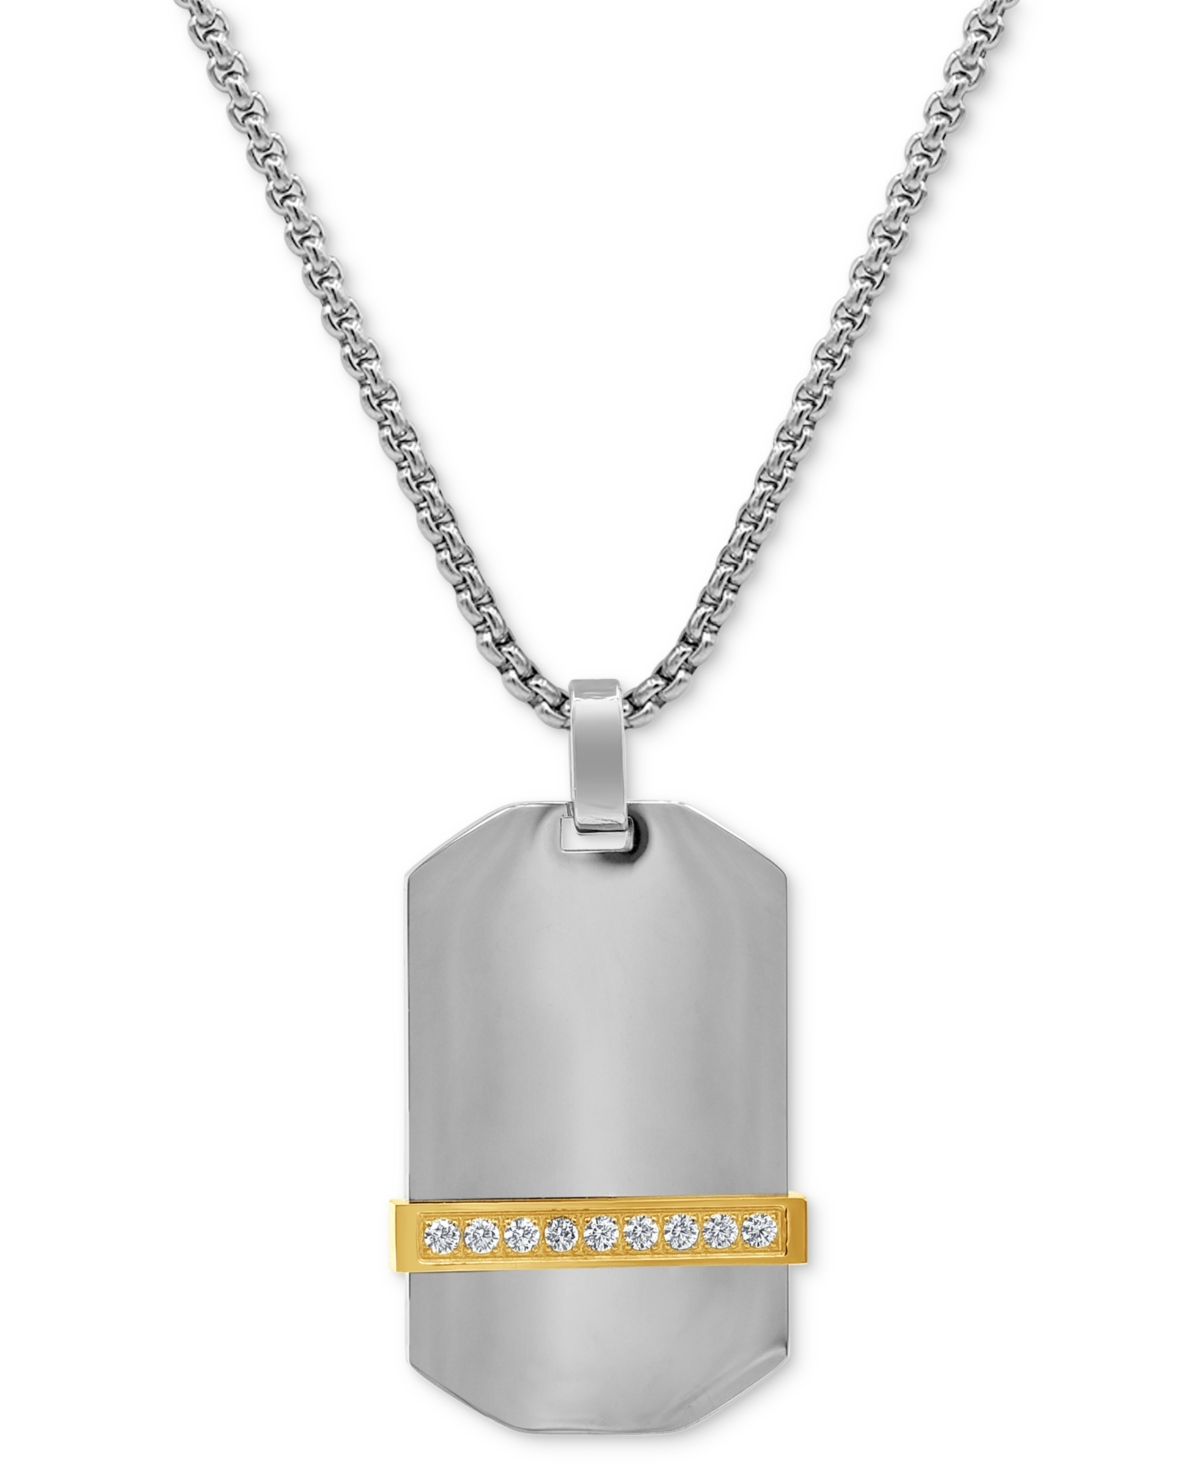 Men's Cubic Zirconia Dog Tag 24" Pendant Necklace in Stainless Steel & Yellow Ion-Plate - Two-Tone